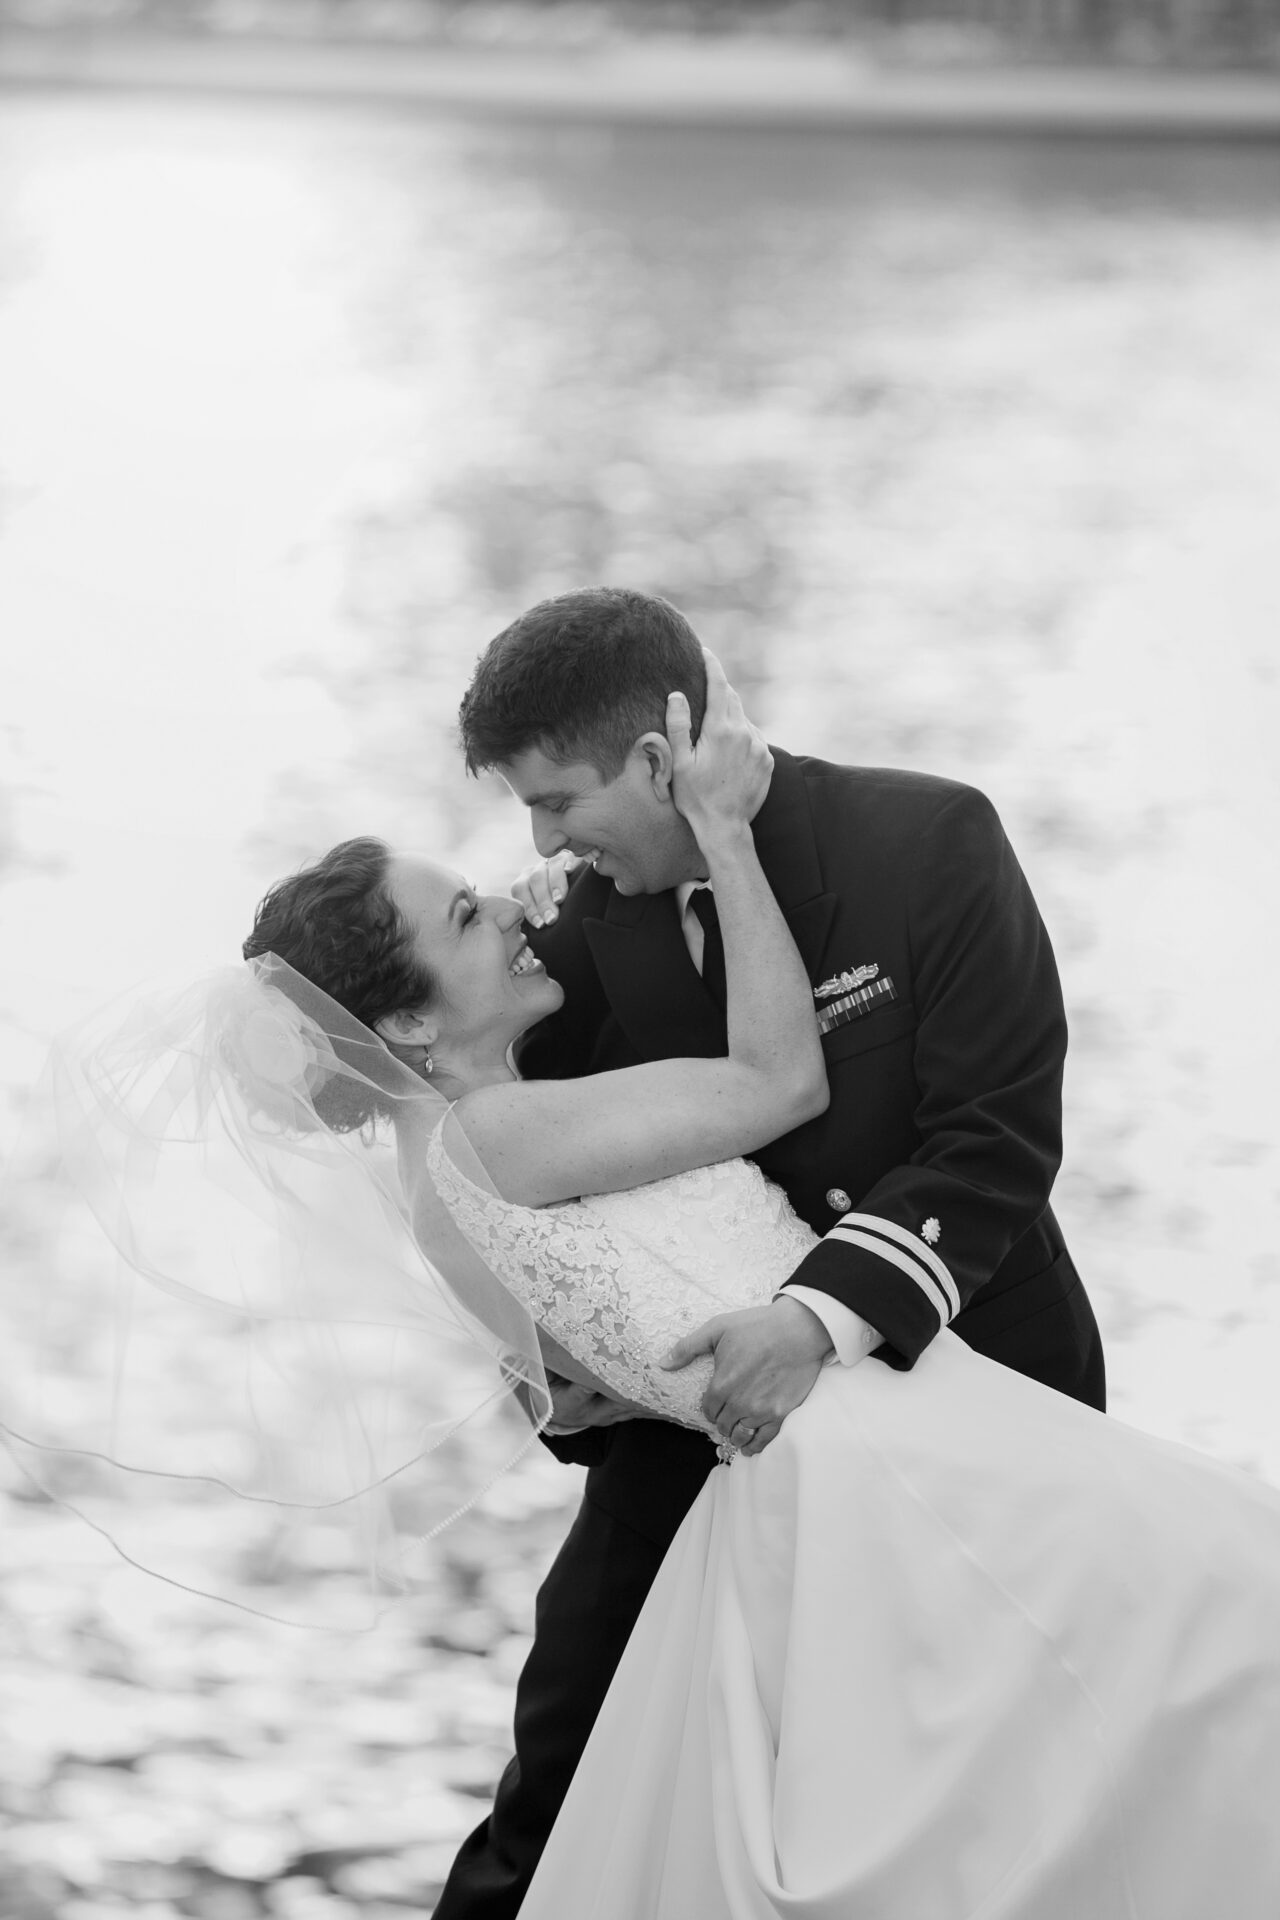 Wedding photo of a happy bride and groom by Astrapia Photography